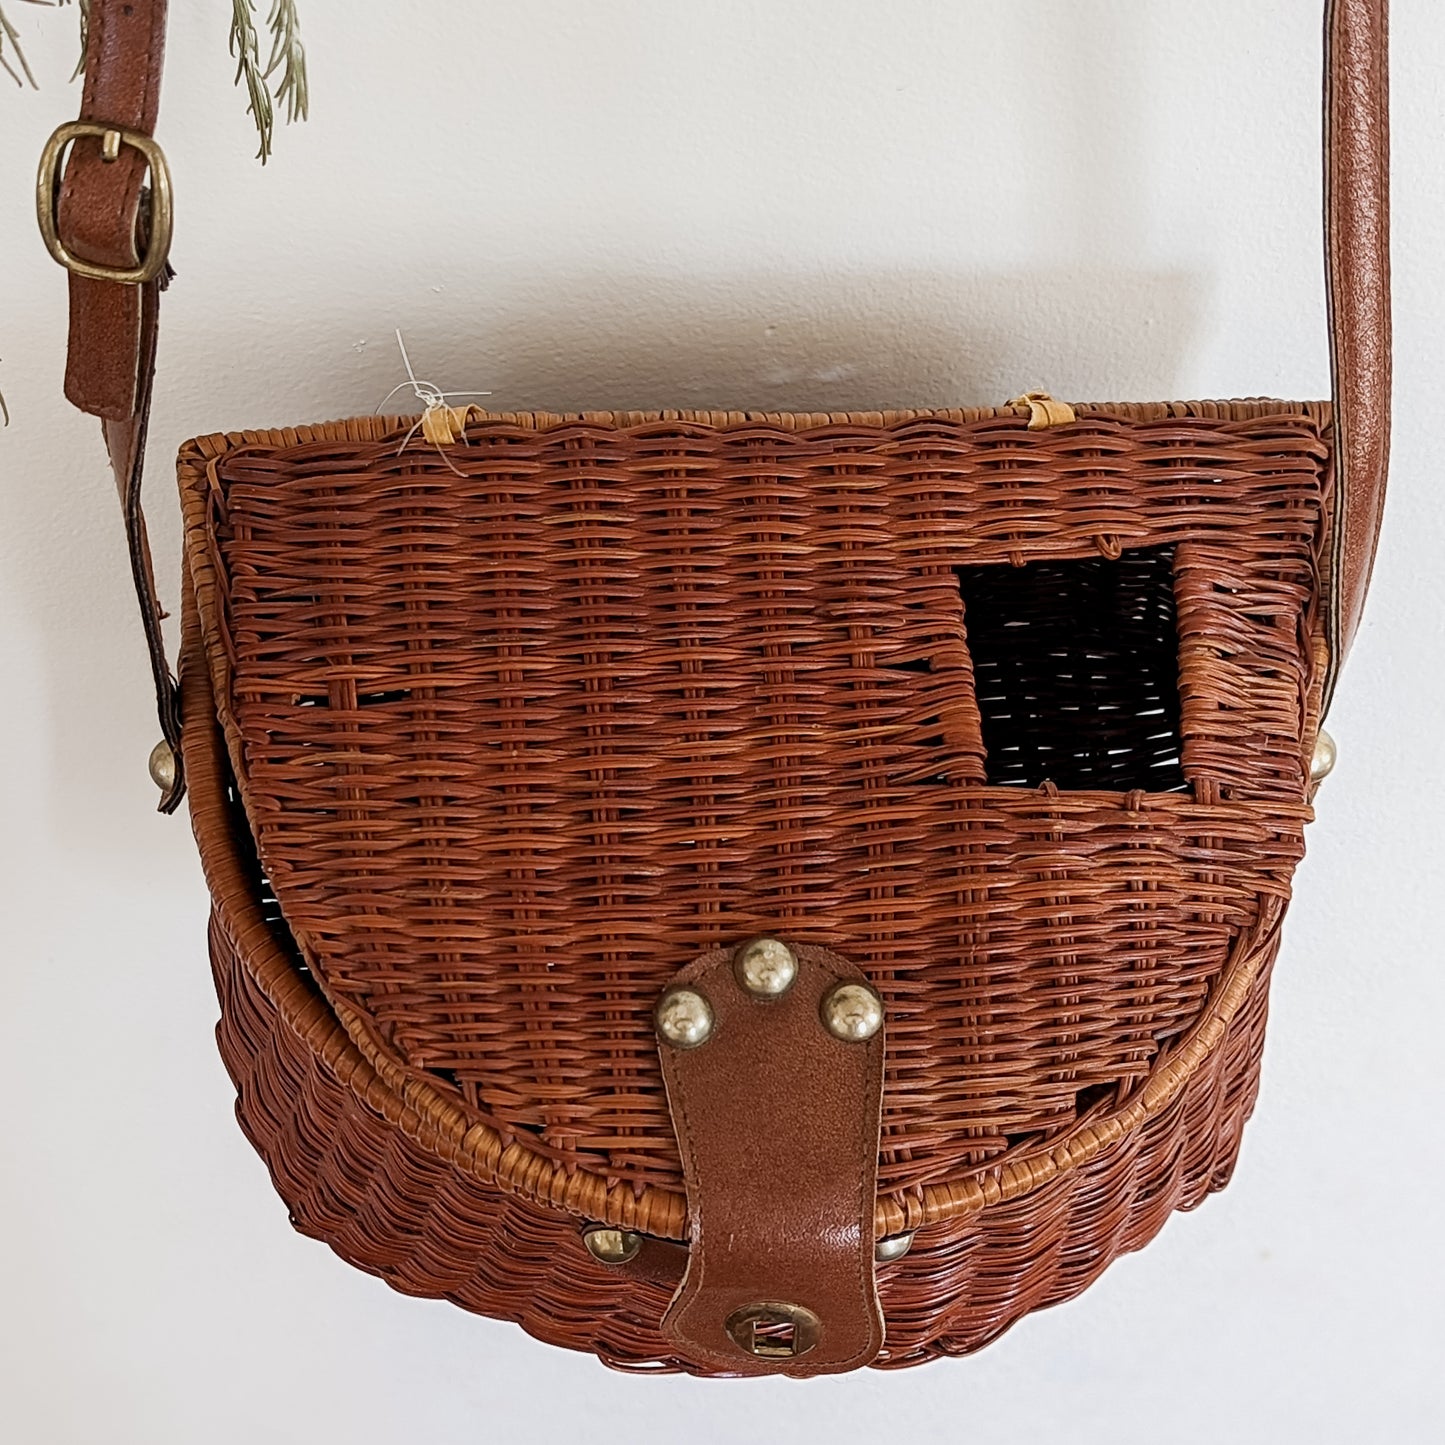 Woven Creel Basket / Foraging Basket with Leather Strap – 3